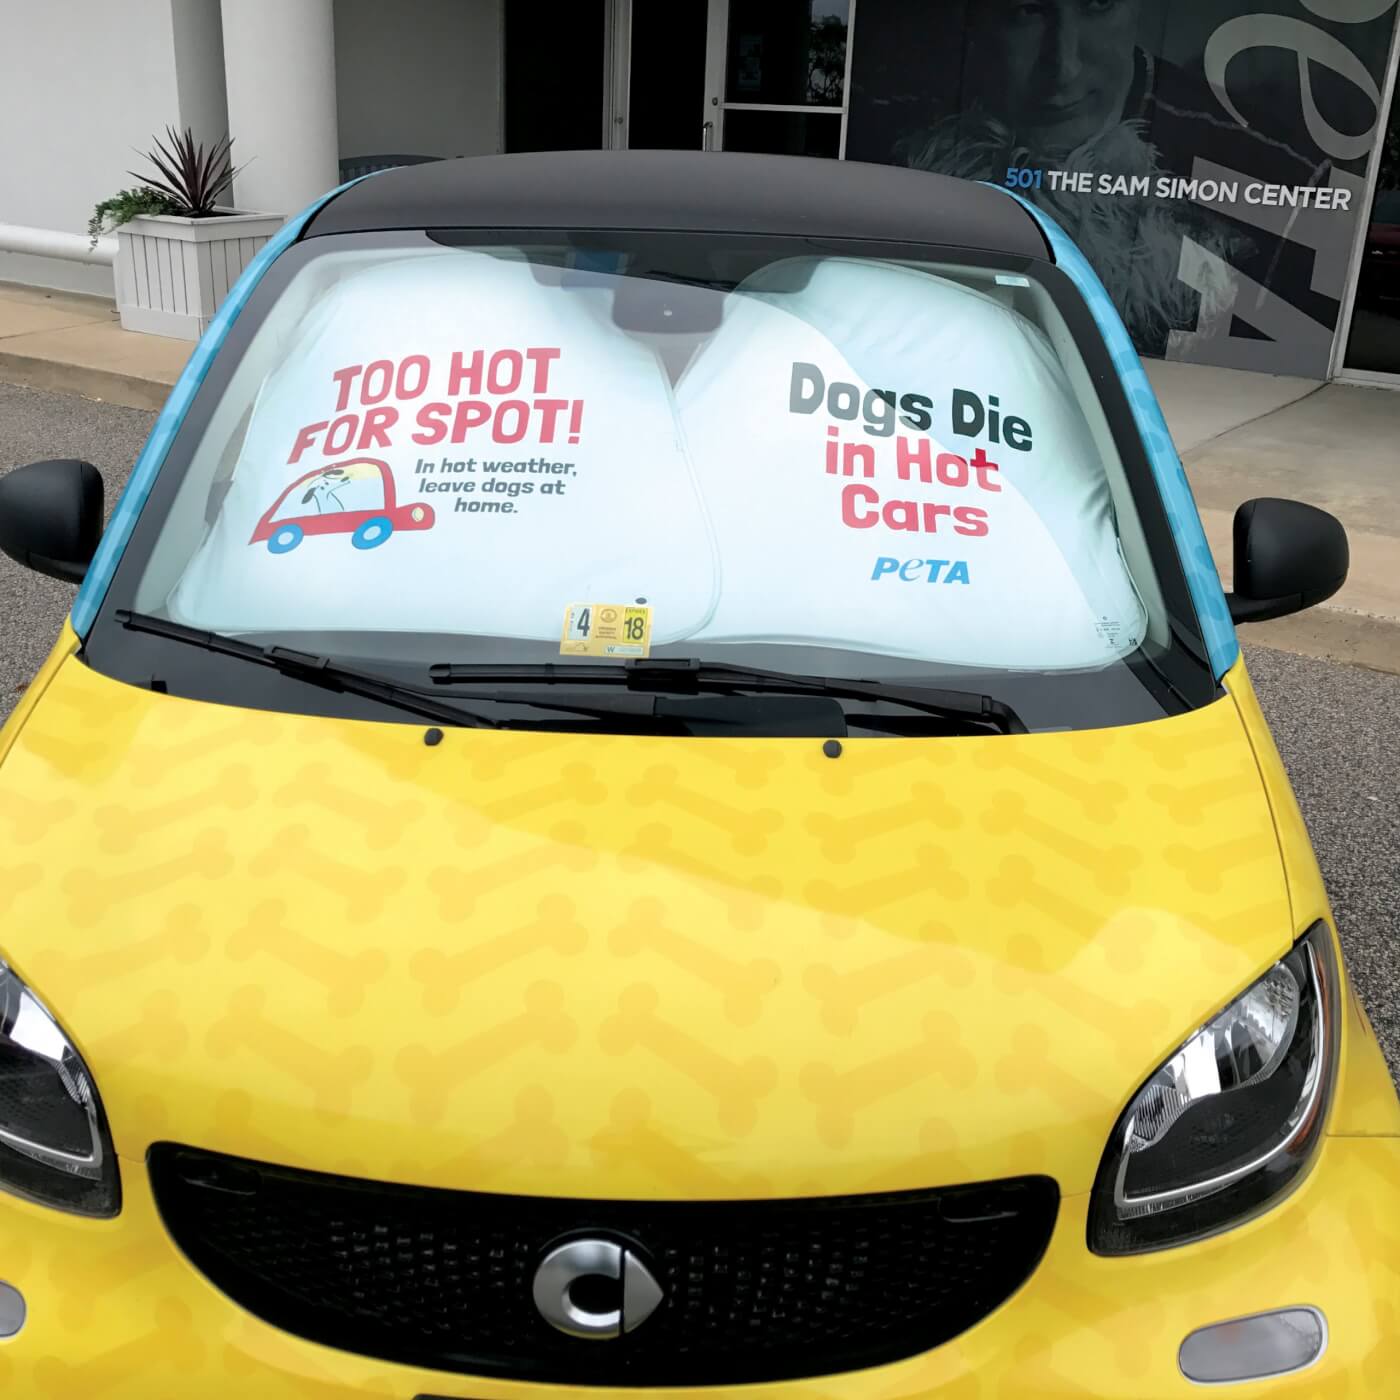 A yellow car decorated with pale dog-bones sports the "Too Hot For Spot" sunshade as Car Decor